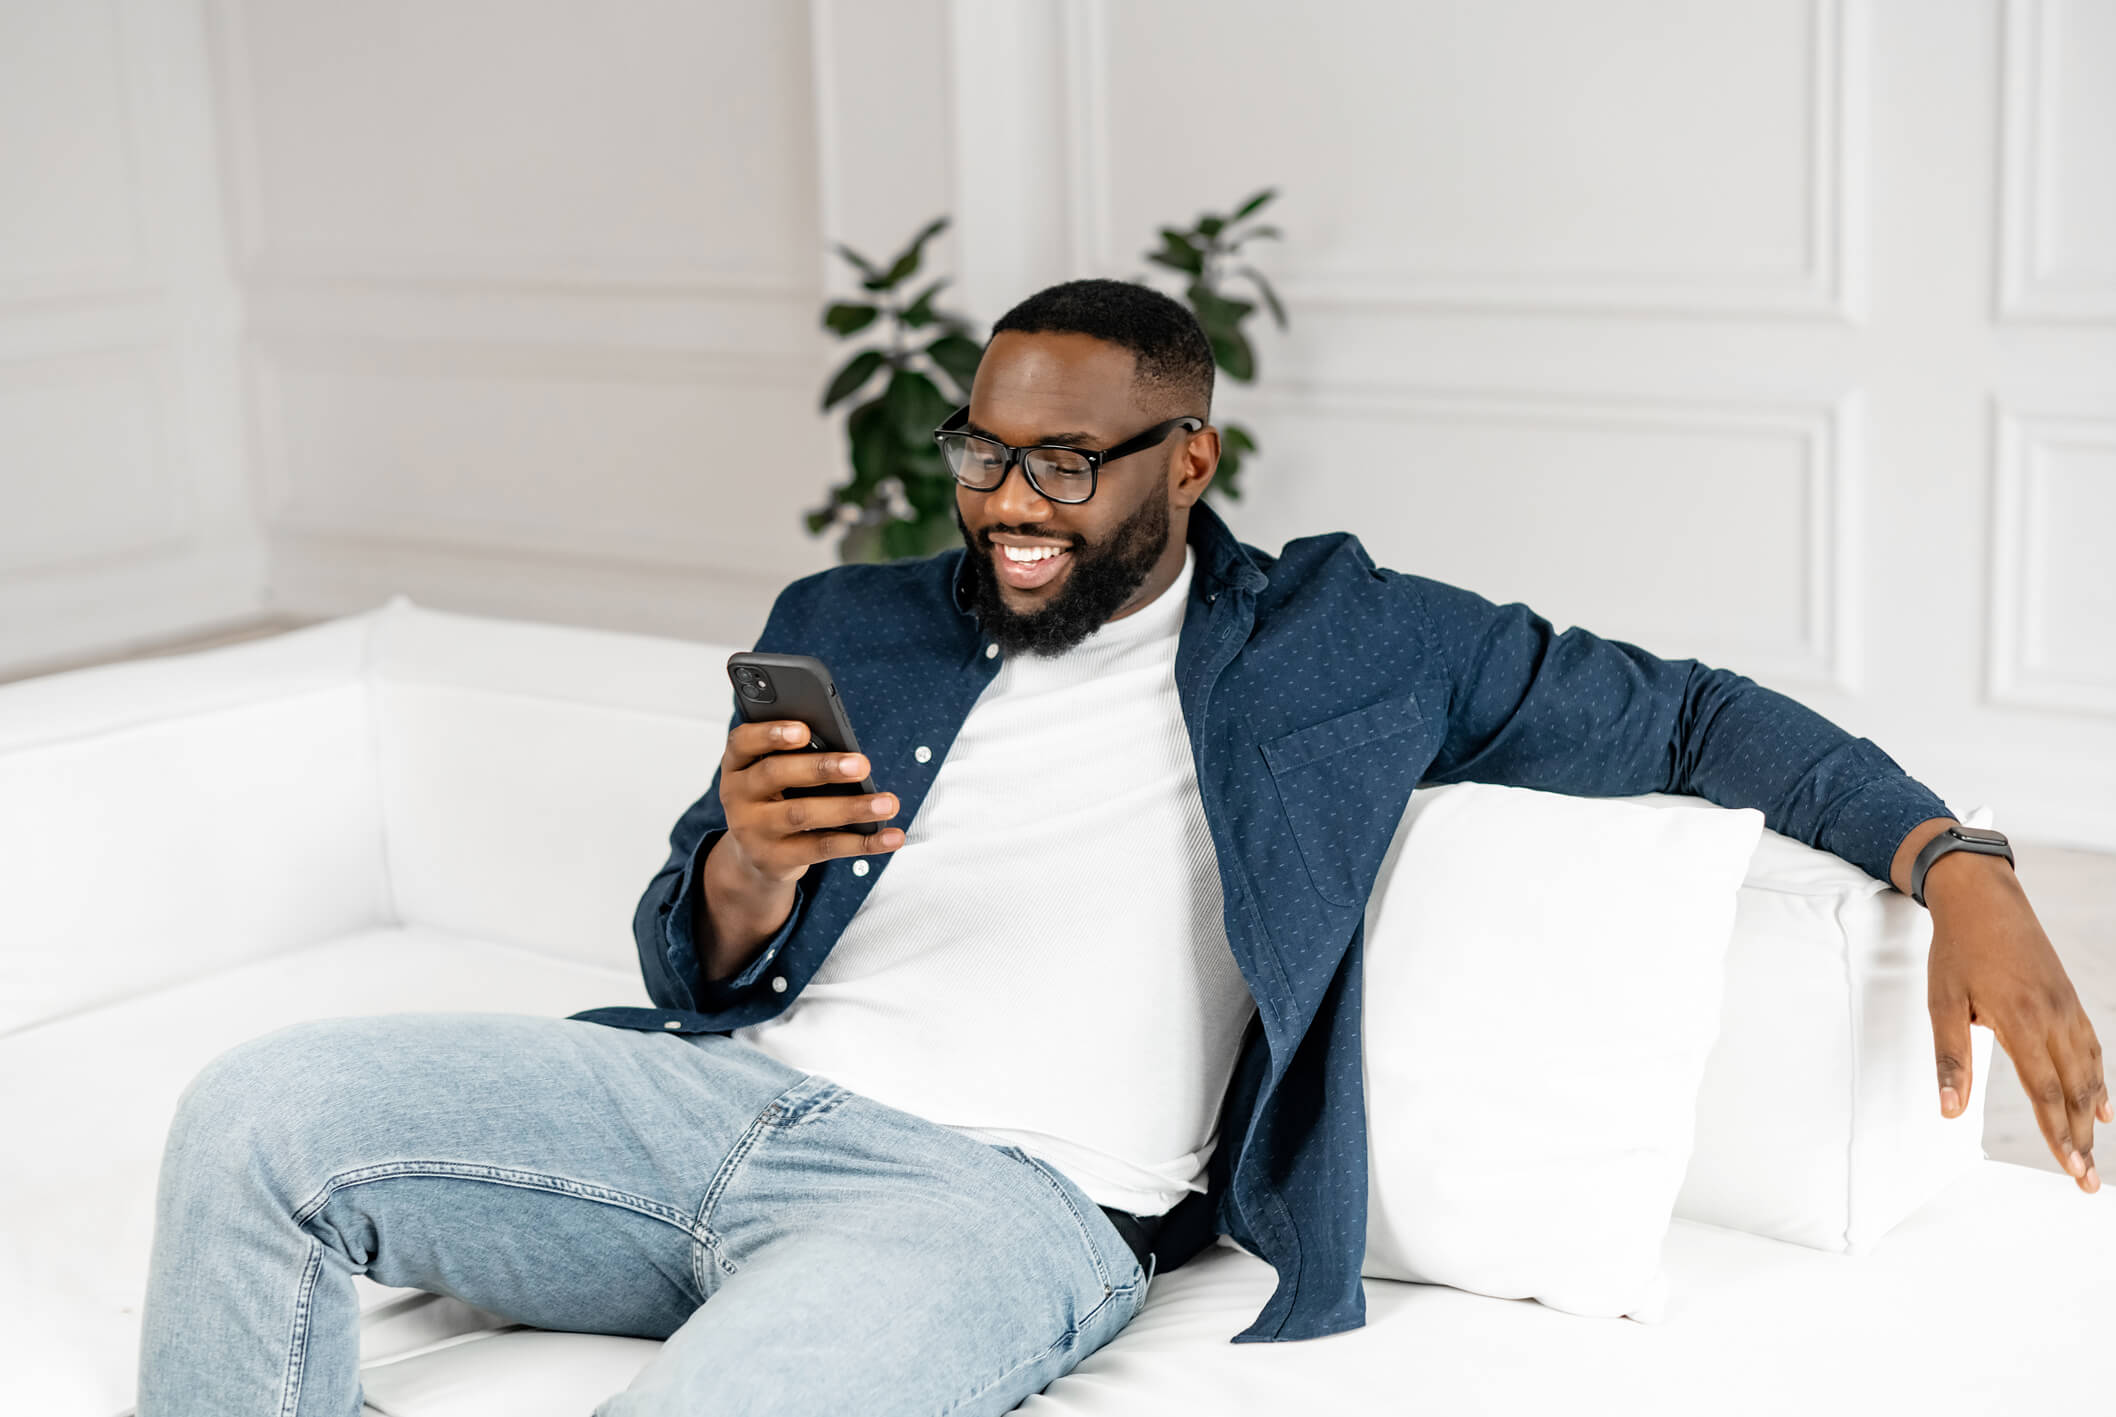 A bearded man with short dark hair, galsses, and a blue collared shirt over a white tee smiles at his phone as he sits on a white sofa.